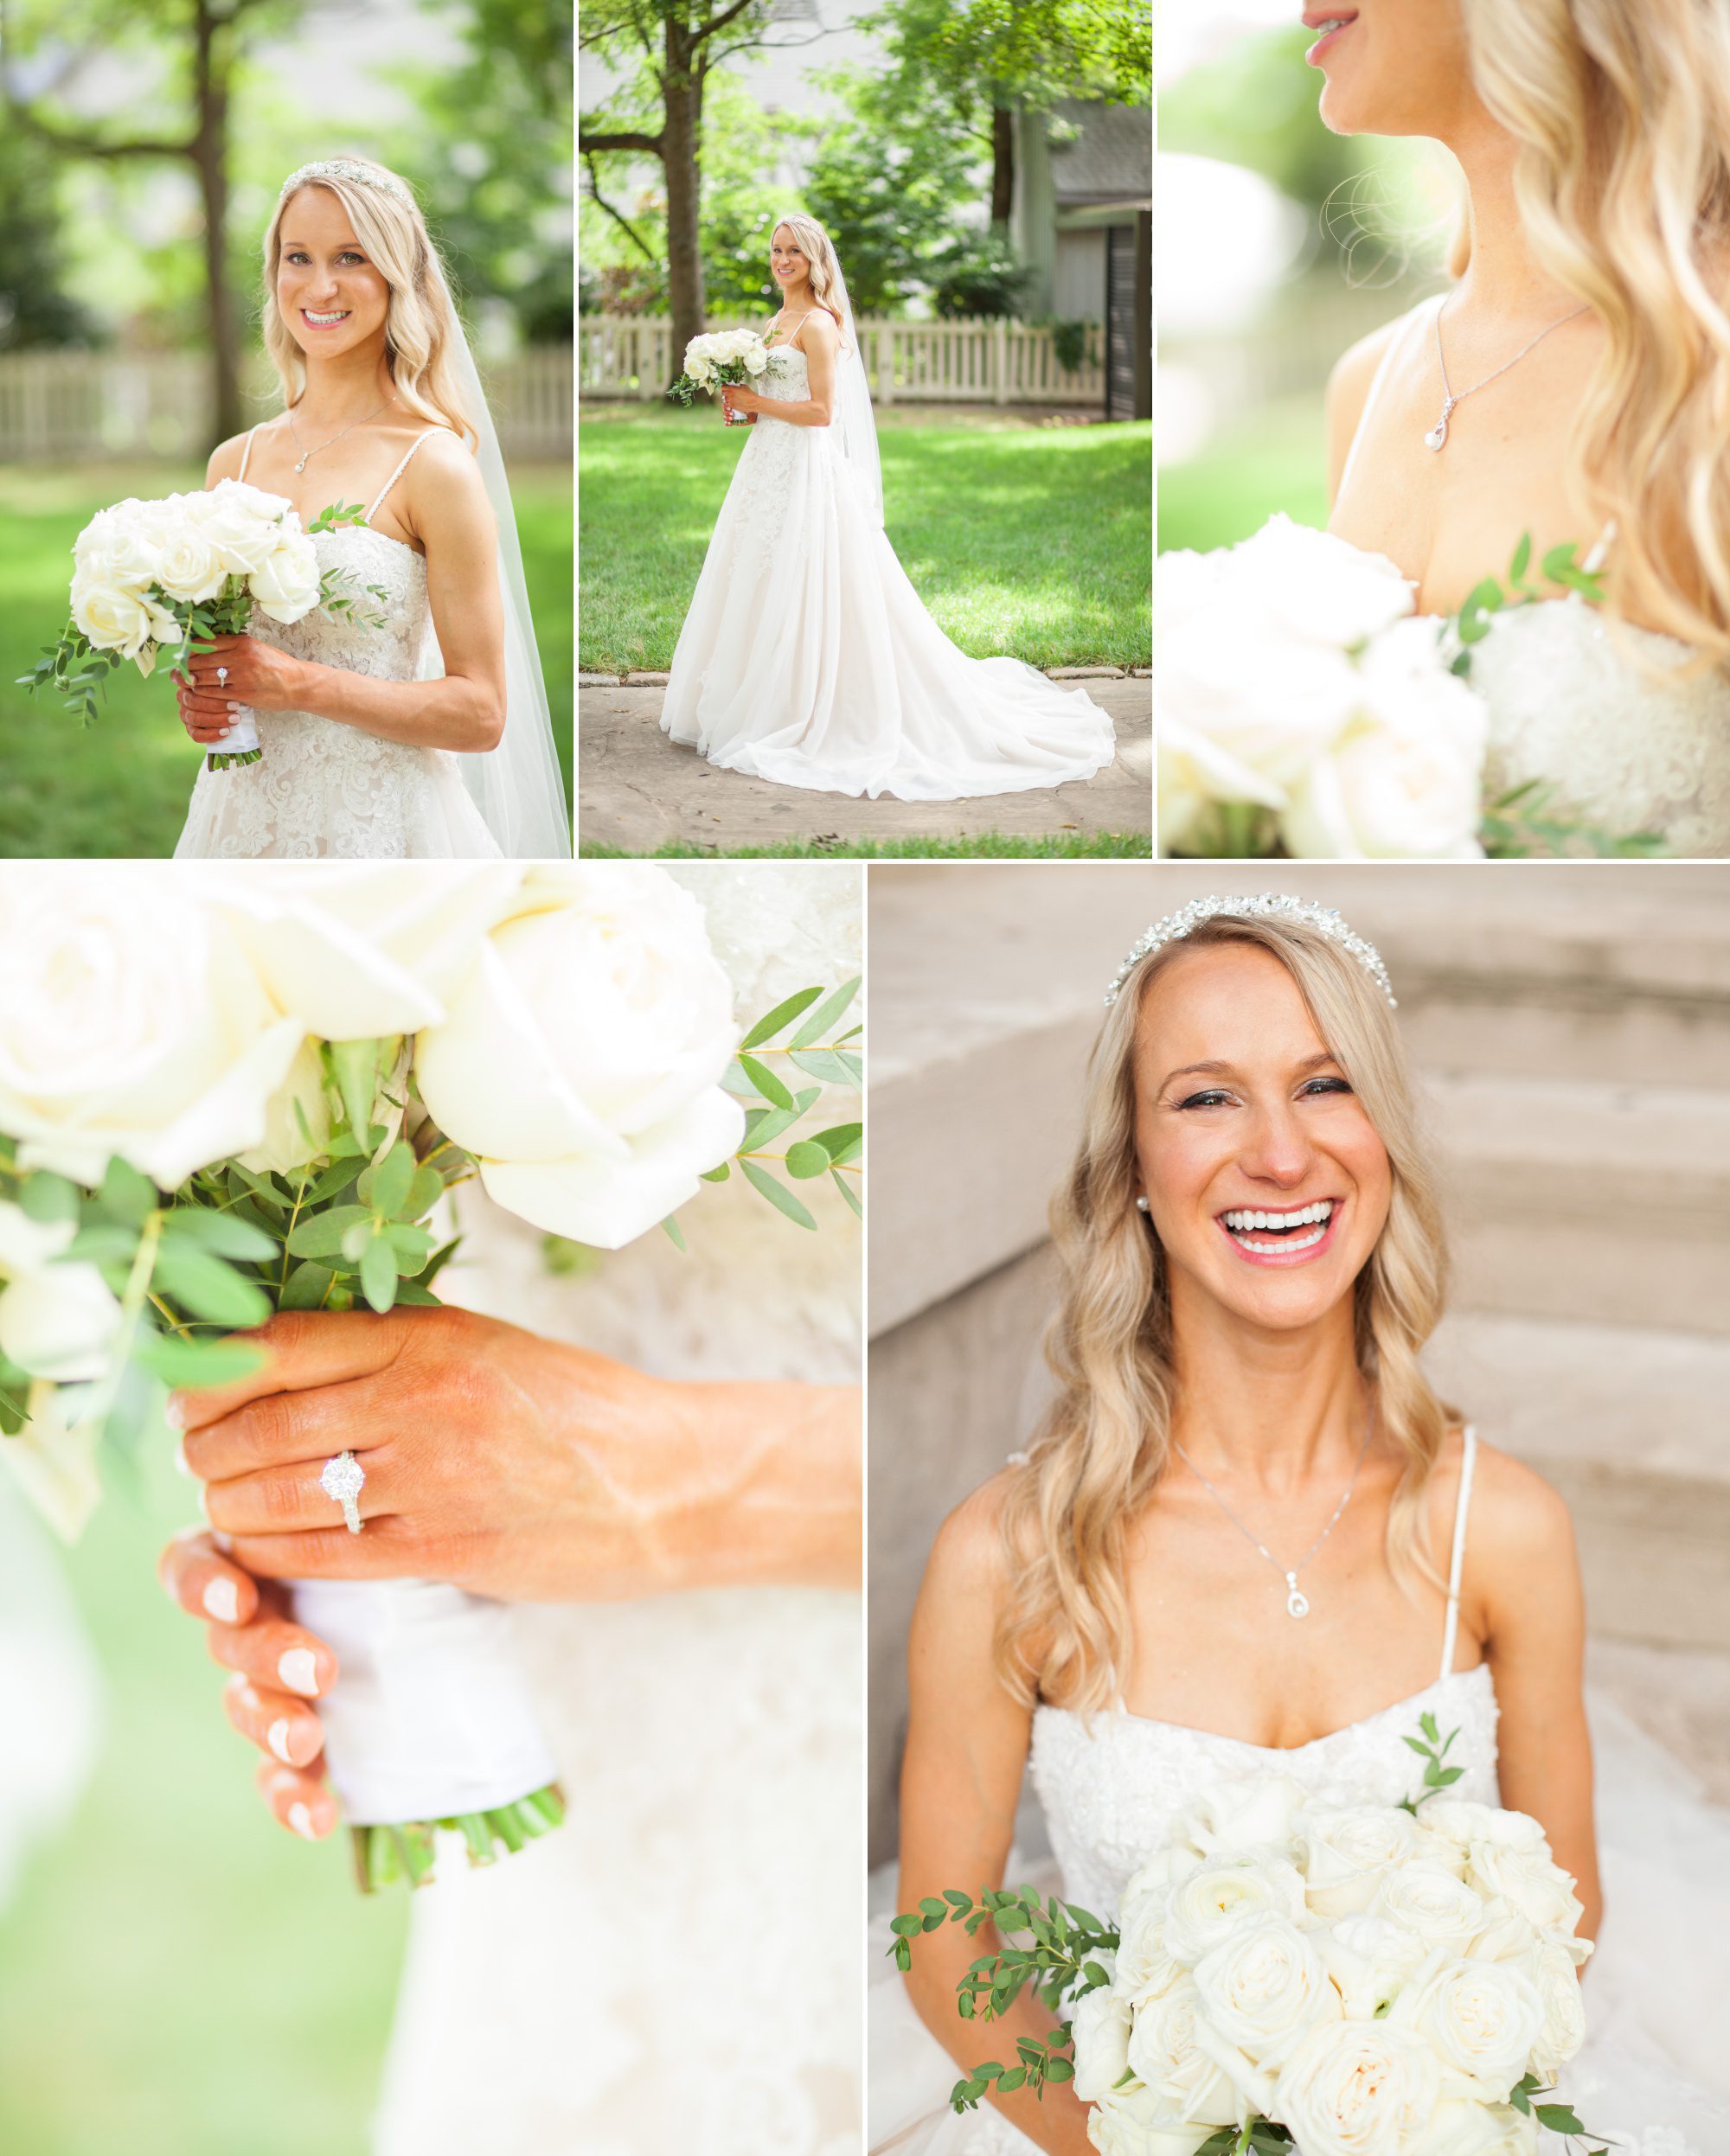 Bridal portraits and photos of bride before wedding ceremony and reception at Belle Meade Plantation in Nashville, TN. Photos by Krista Lee Photography 